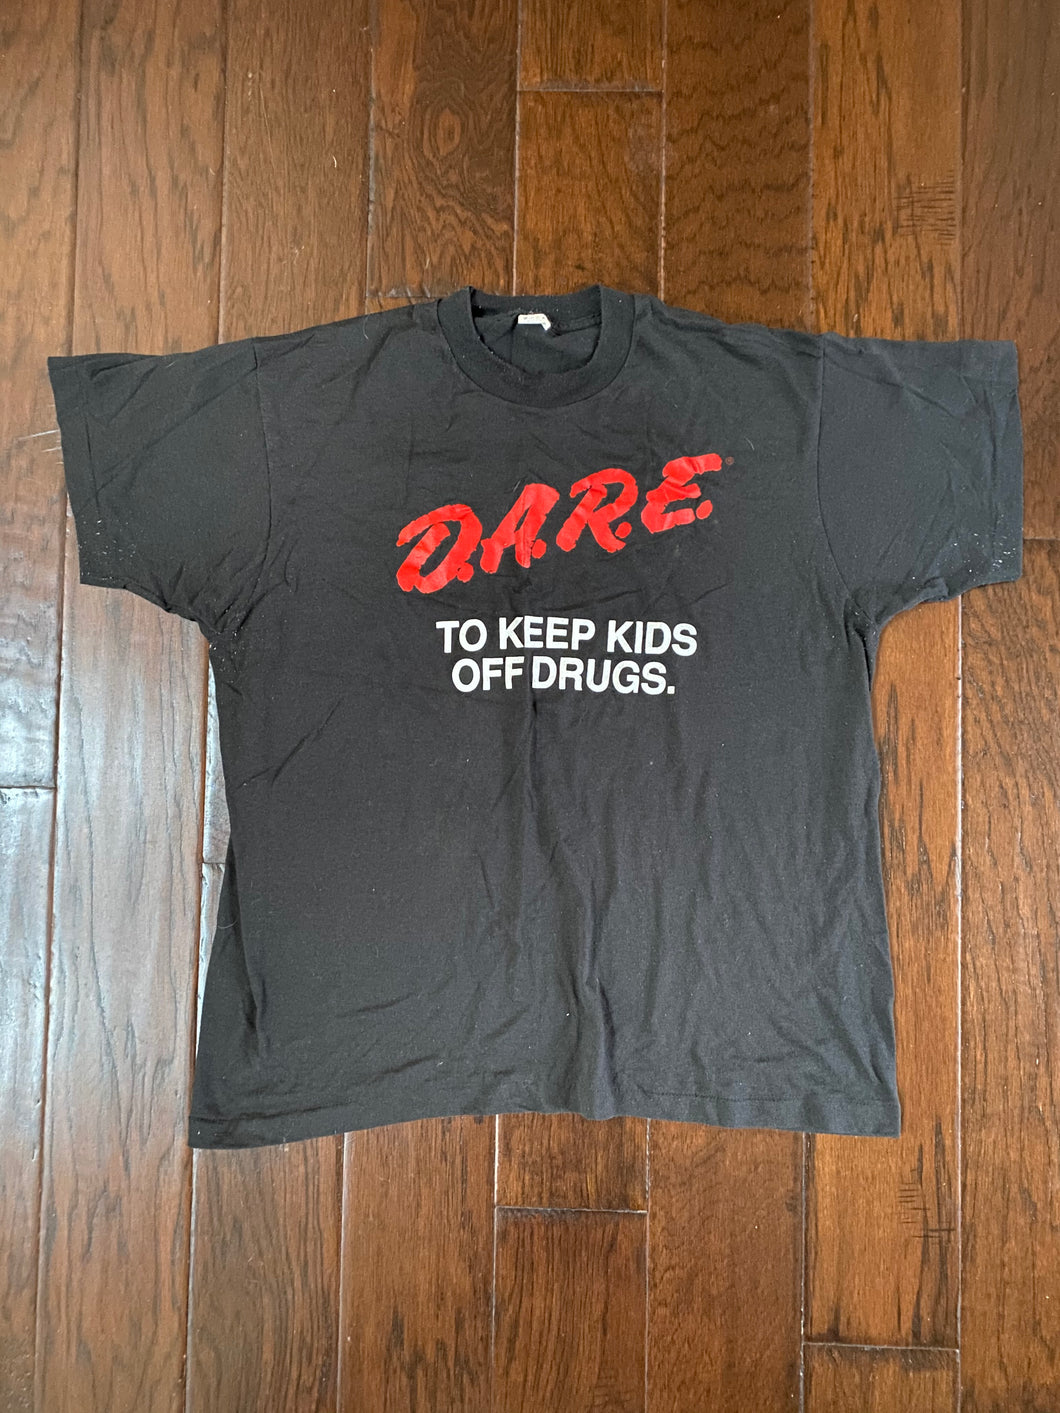 D.A.R.E “To Keep Kids Off Drugs” 1980’s Vintage Distressed T-shirt